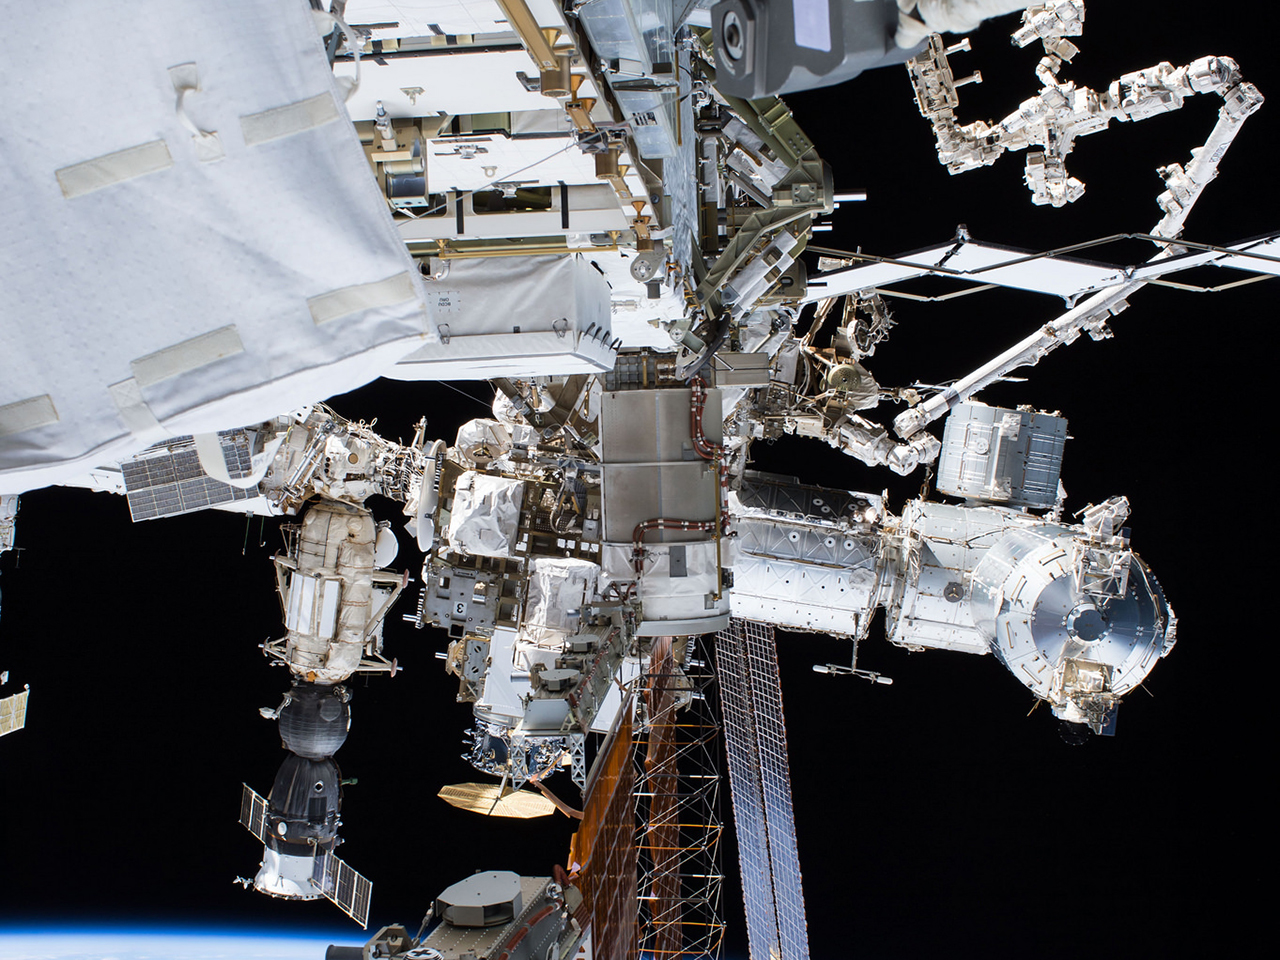  A spacewalking astronaut's view of the outpost. Cygnus can be seen near the center. Photo Credit: NASA 